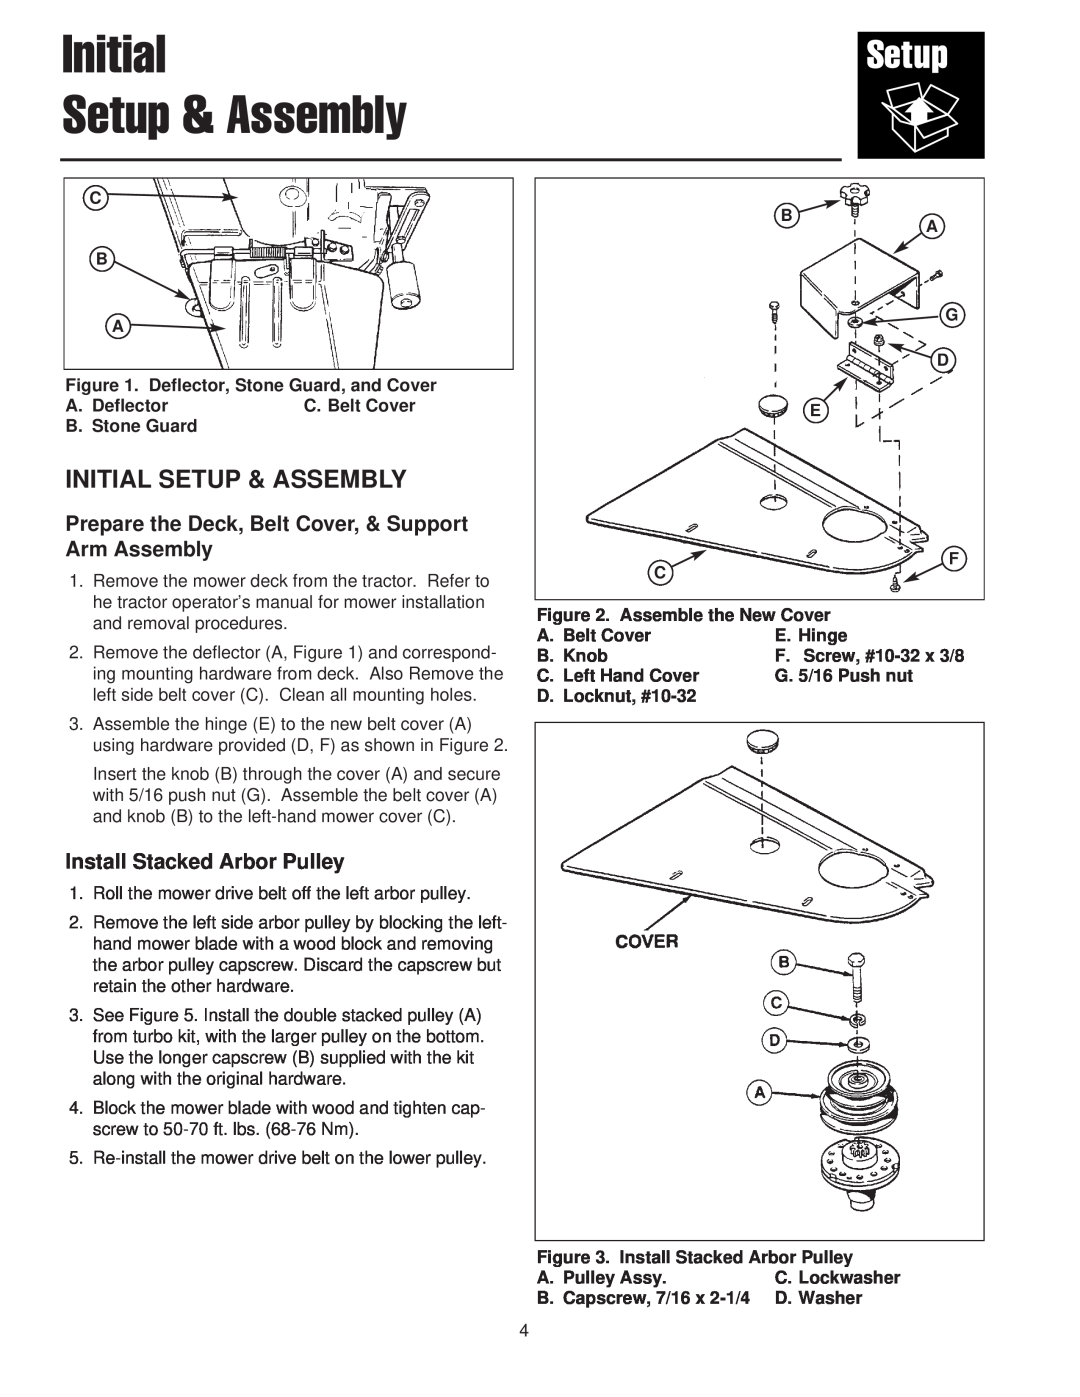 Snapper 1694496, 1726315-02 manual Initial Setup & Assembly, Install Stacked Arbor Pulley 